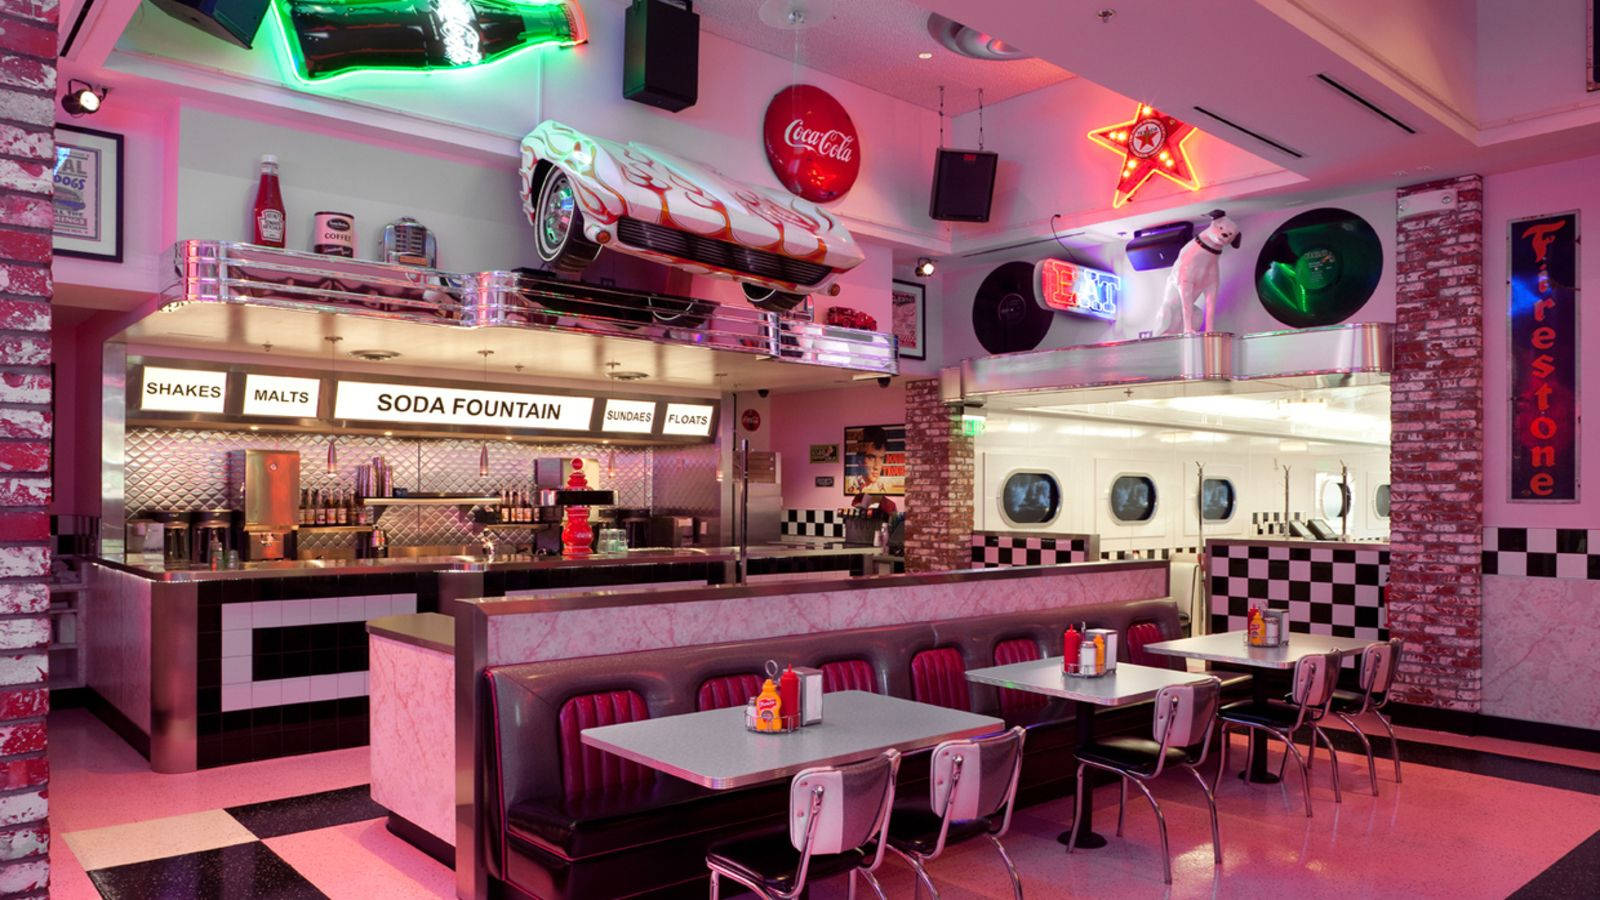 Captivating Pink 50s Diner Interior View